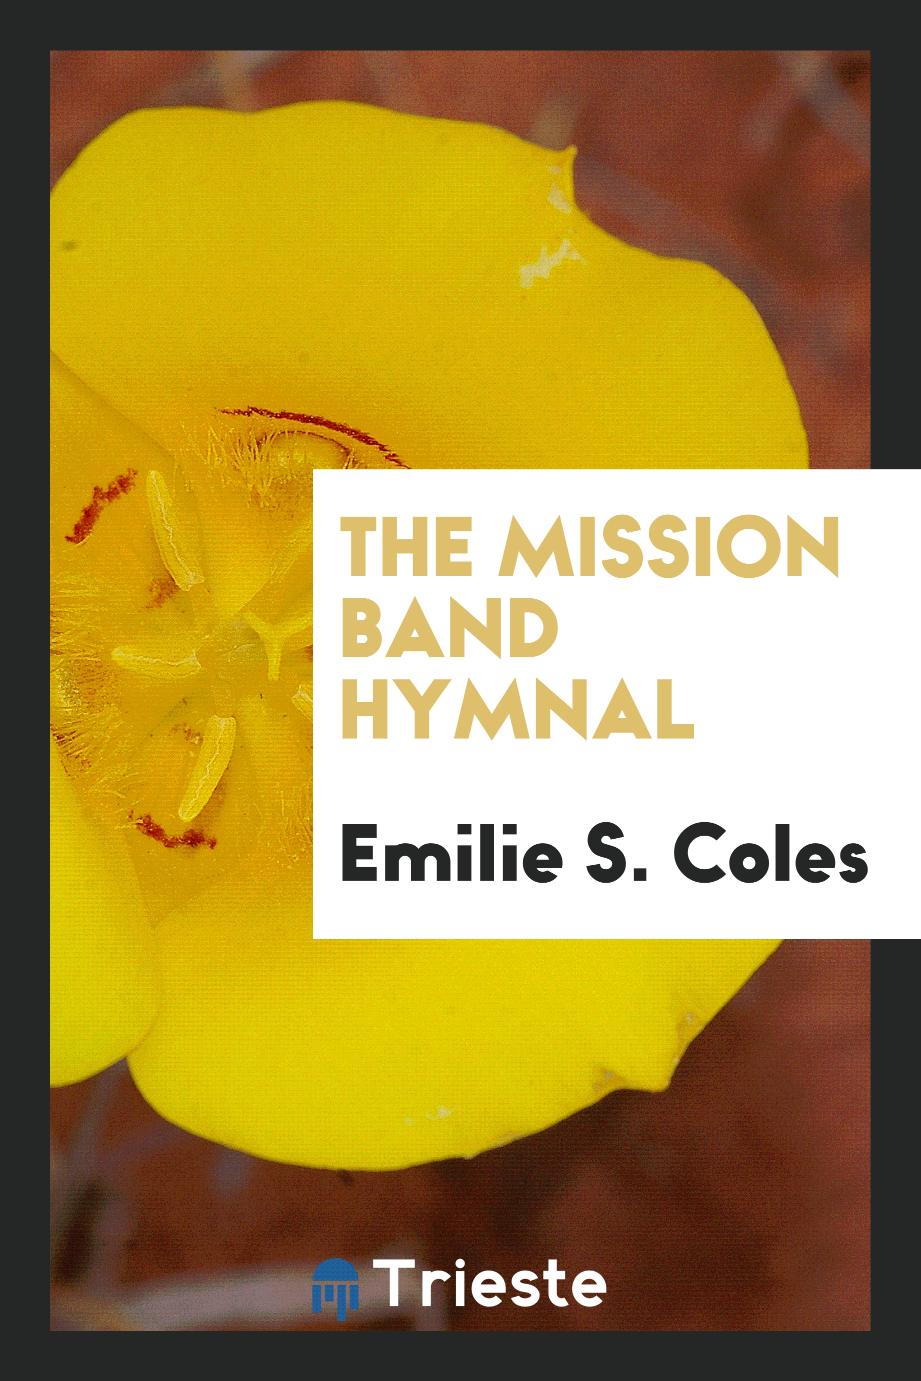 The Mission Band Hymnal